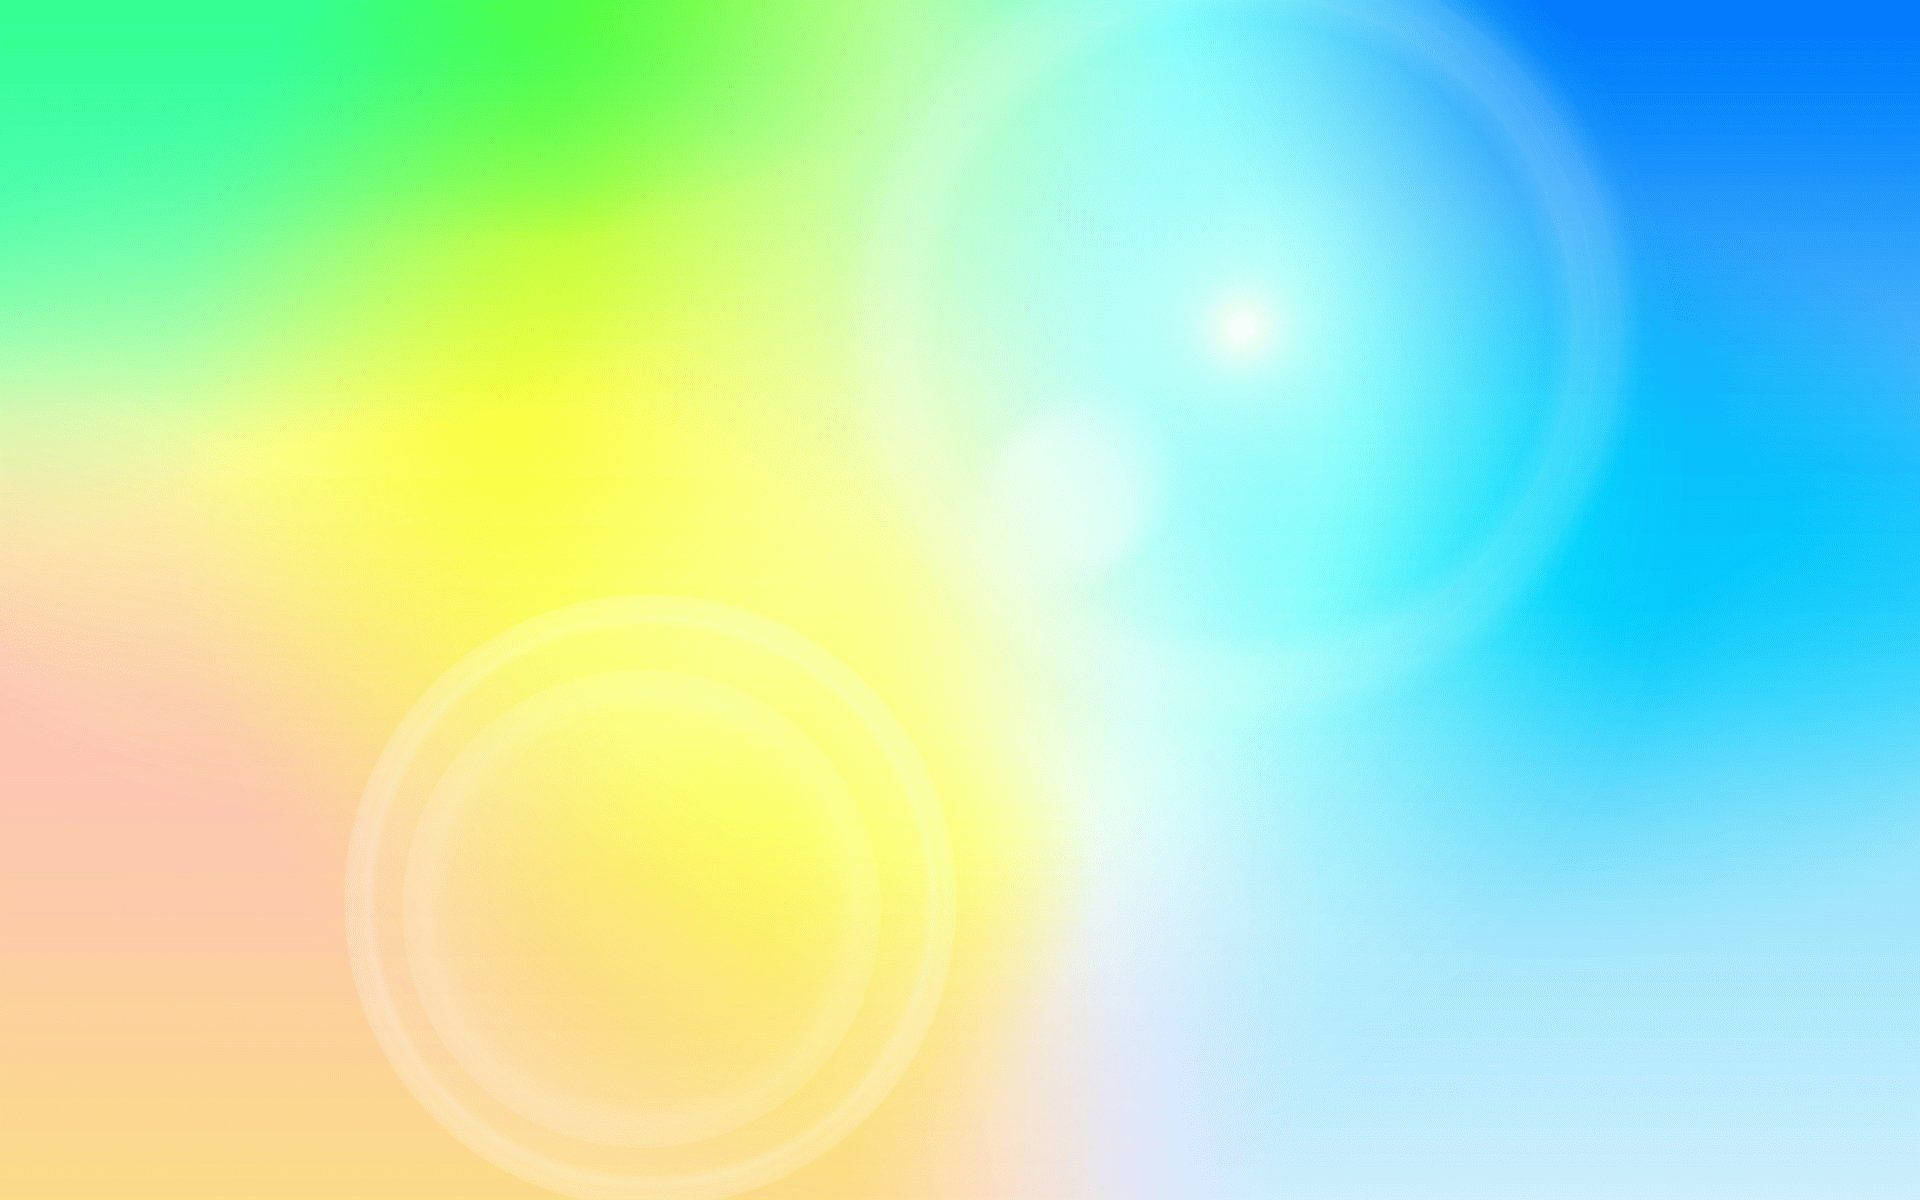 Light Up Your Life With This Colorful Background Wallpaper